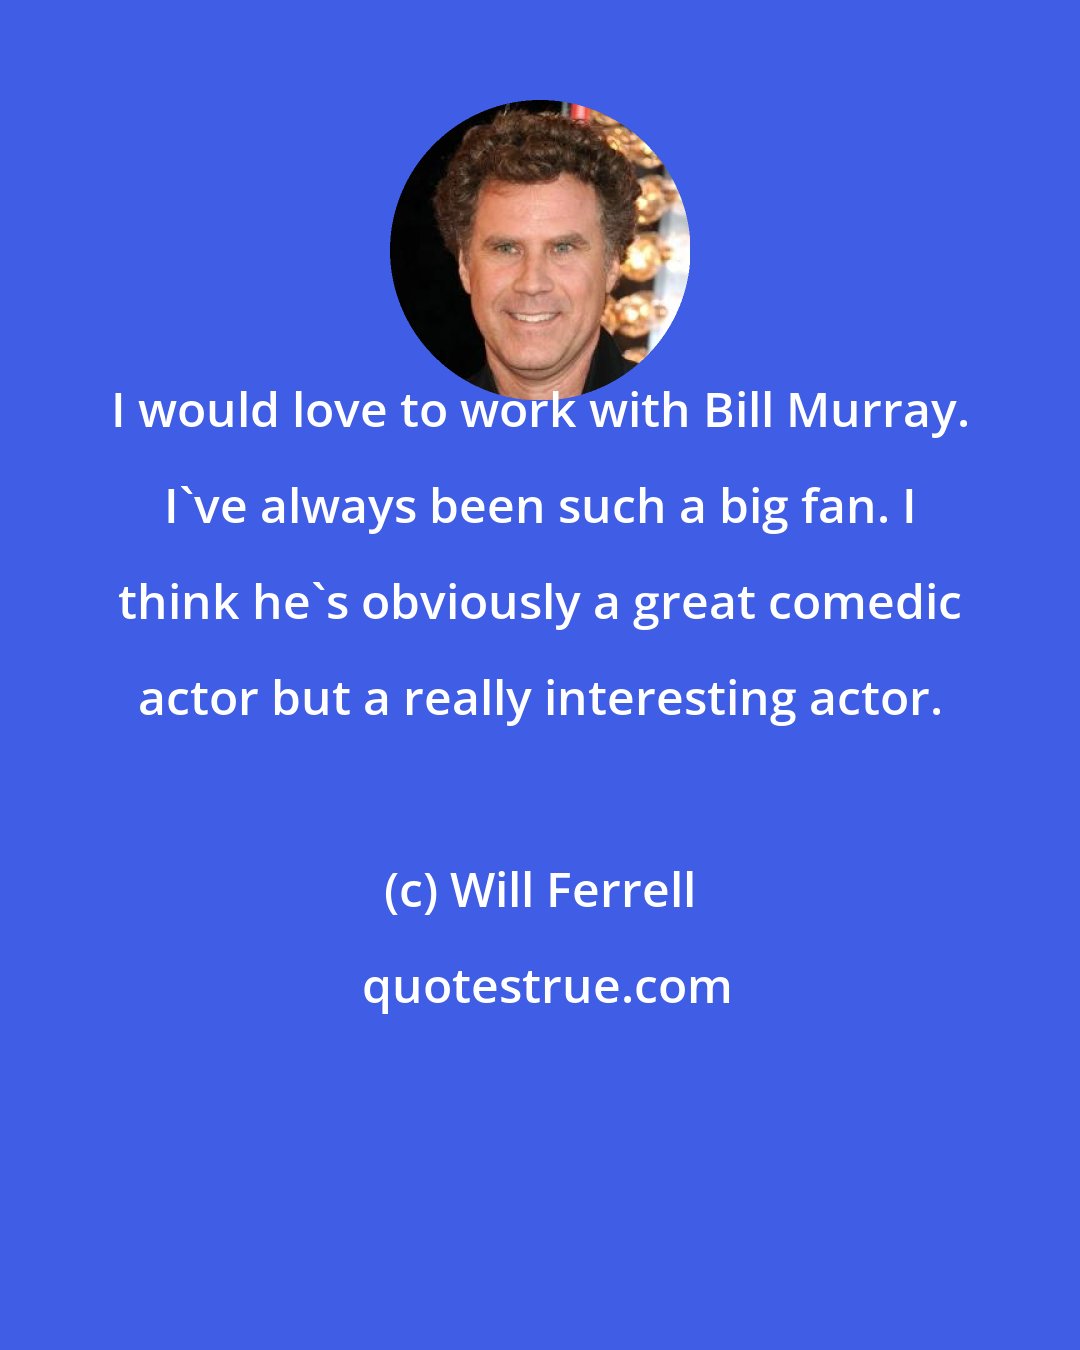 Will Ferrell: I would love to work with Bill Murray. I've always been such a big fan. I think he's obviously a great comedic actor but a really interesting actor.